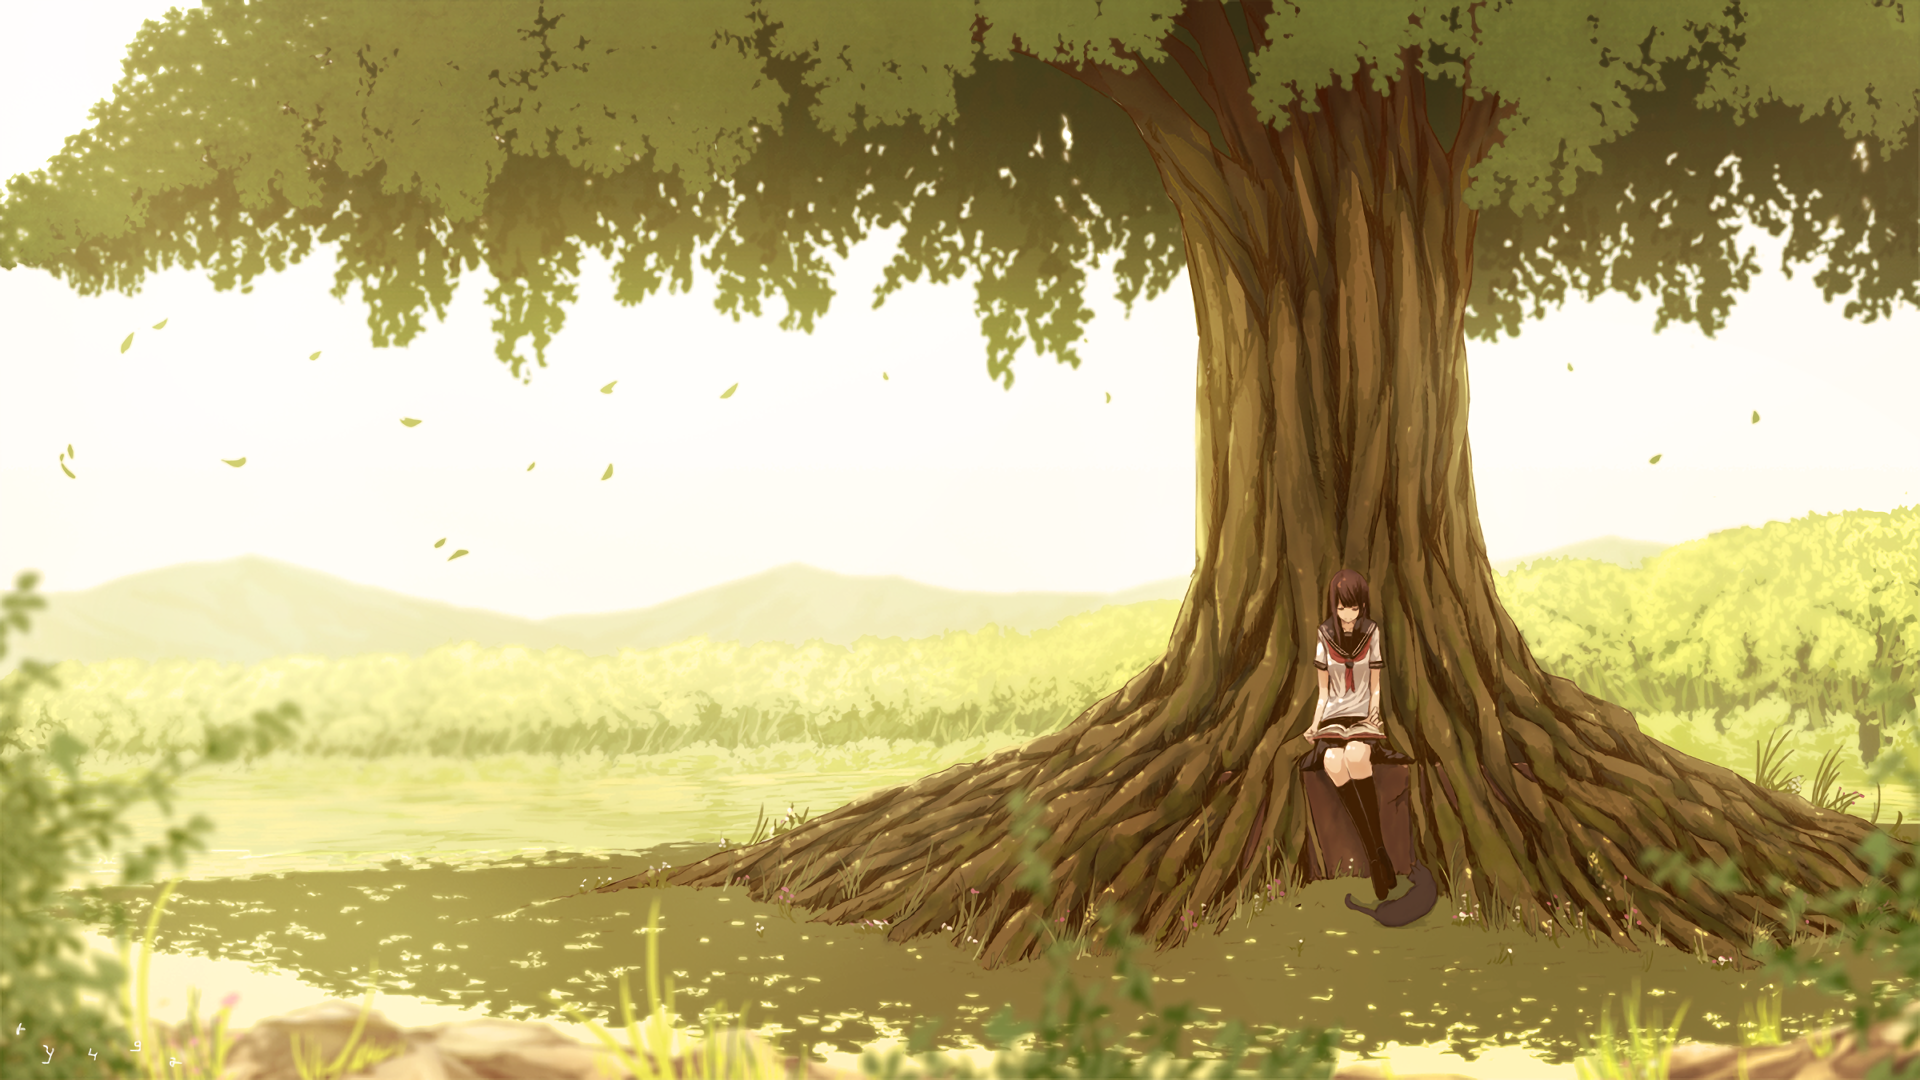 Download 1920x1080 Anime Girl, Giant Tree, Reading A Book, Scenic